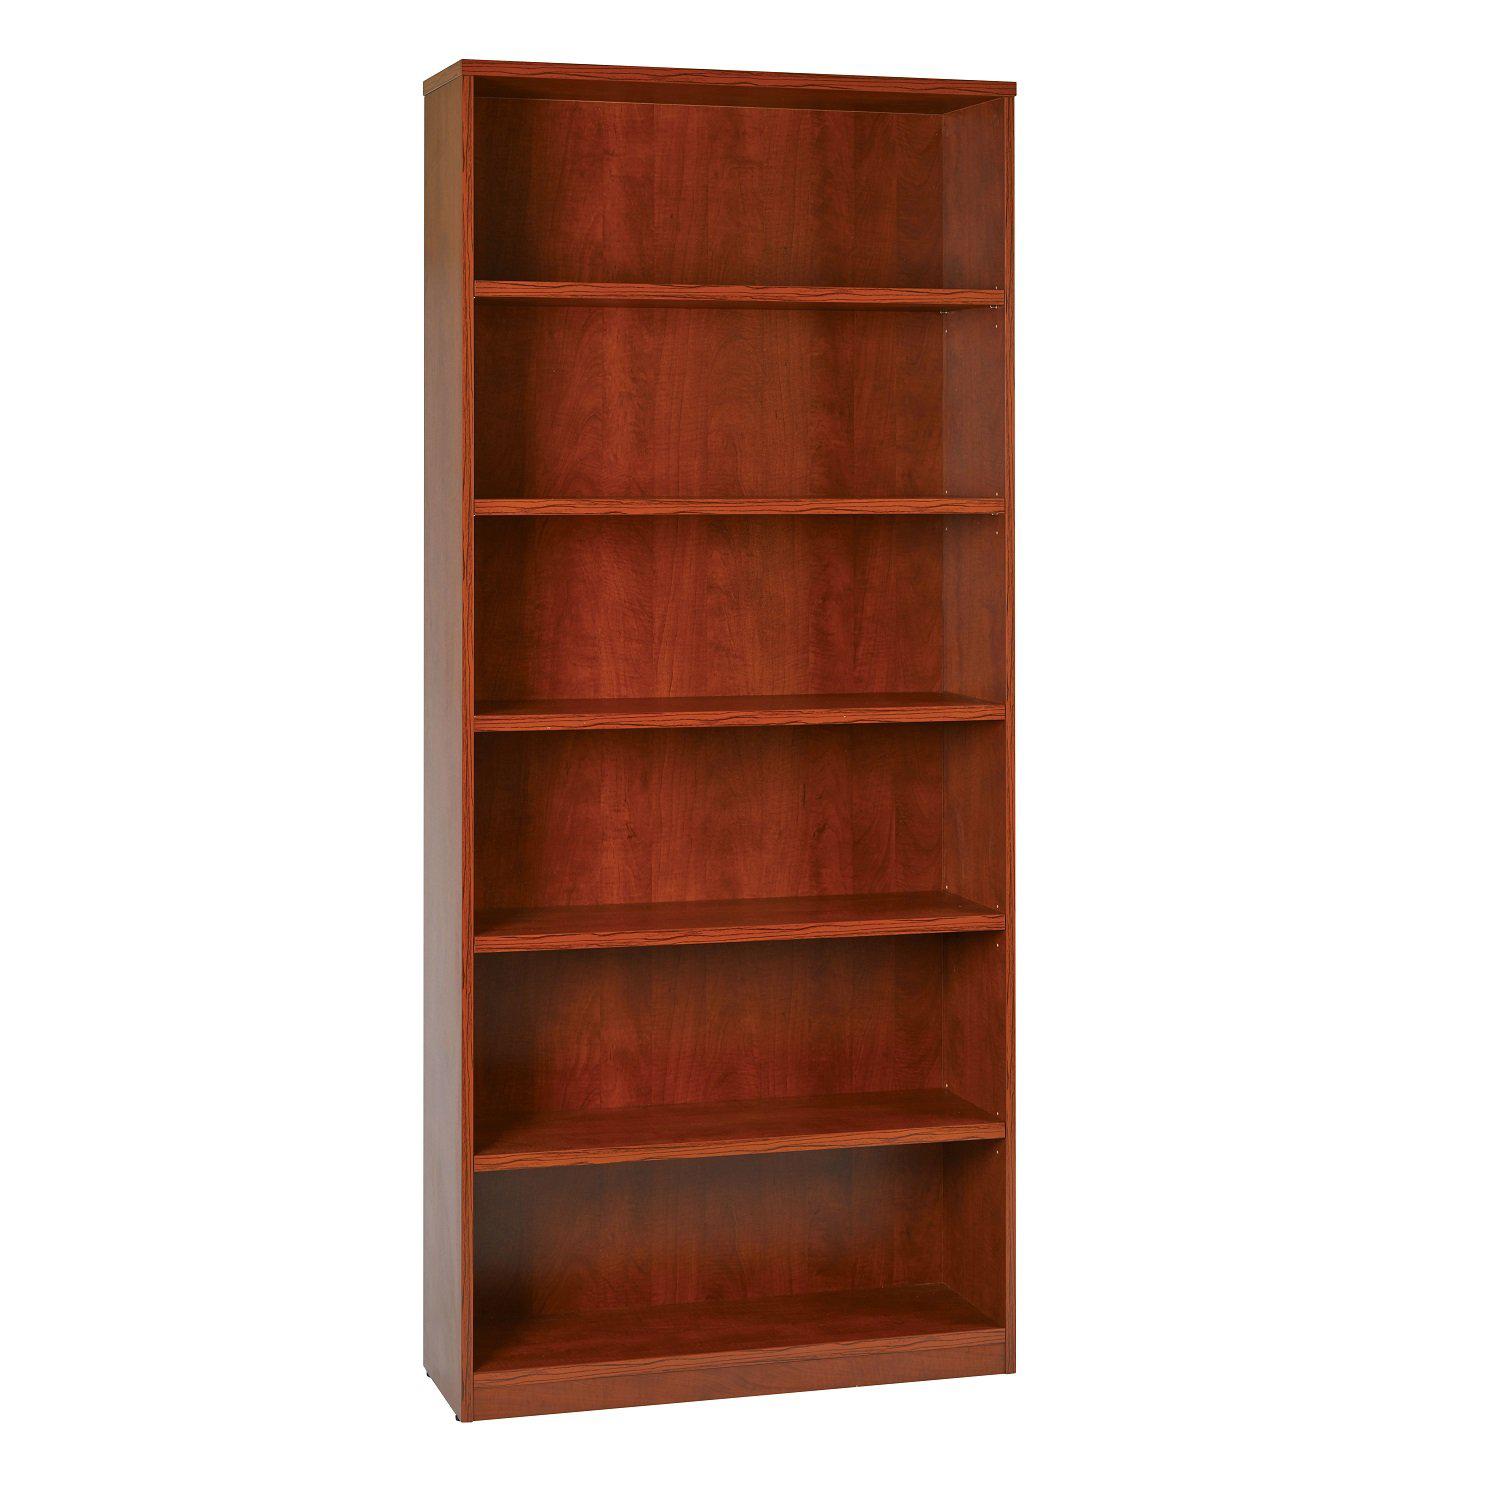 84" High 6-Shelf Laminate Bookcase with 1" Thick Shelves